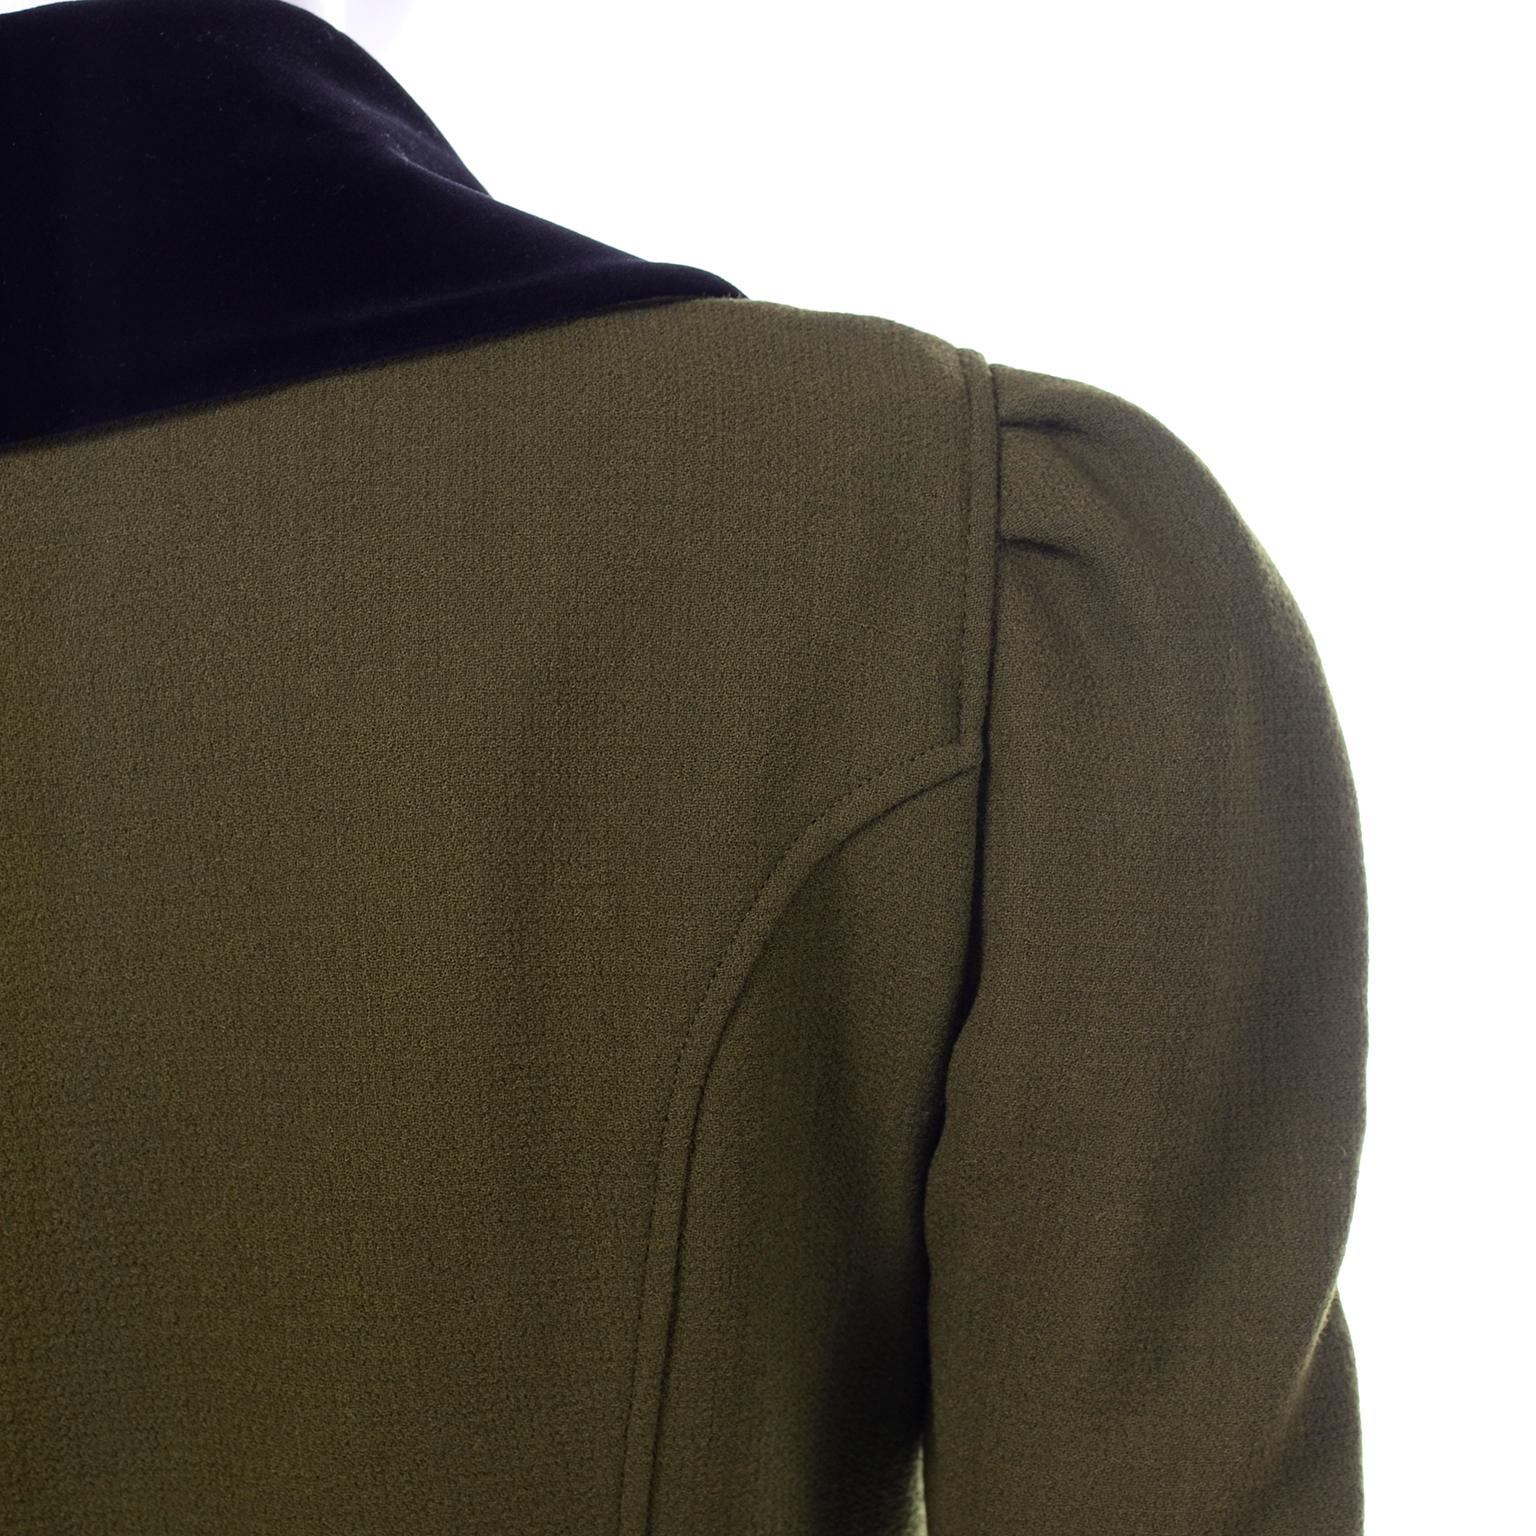 1980s Christian Lacroix Green Wool Double Breasted Jacket w/ Black Velvet Collar For Sale 2